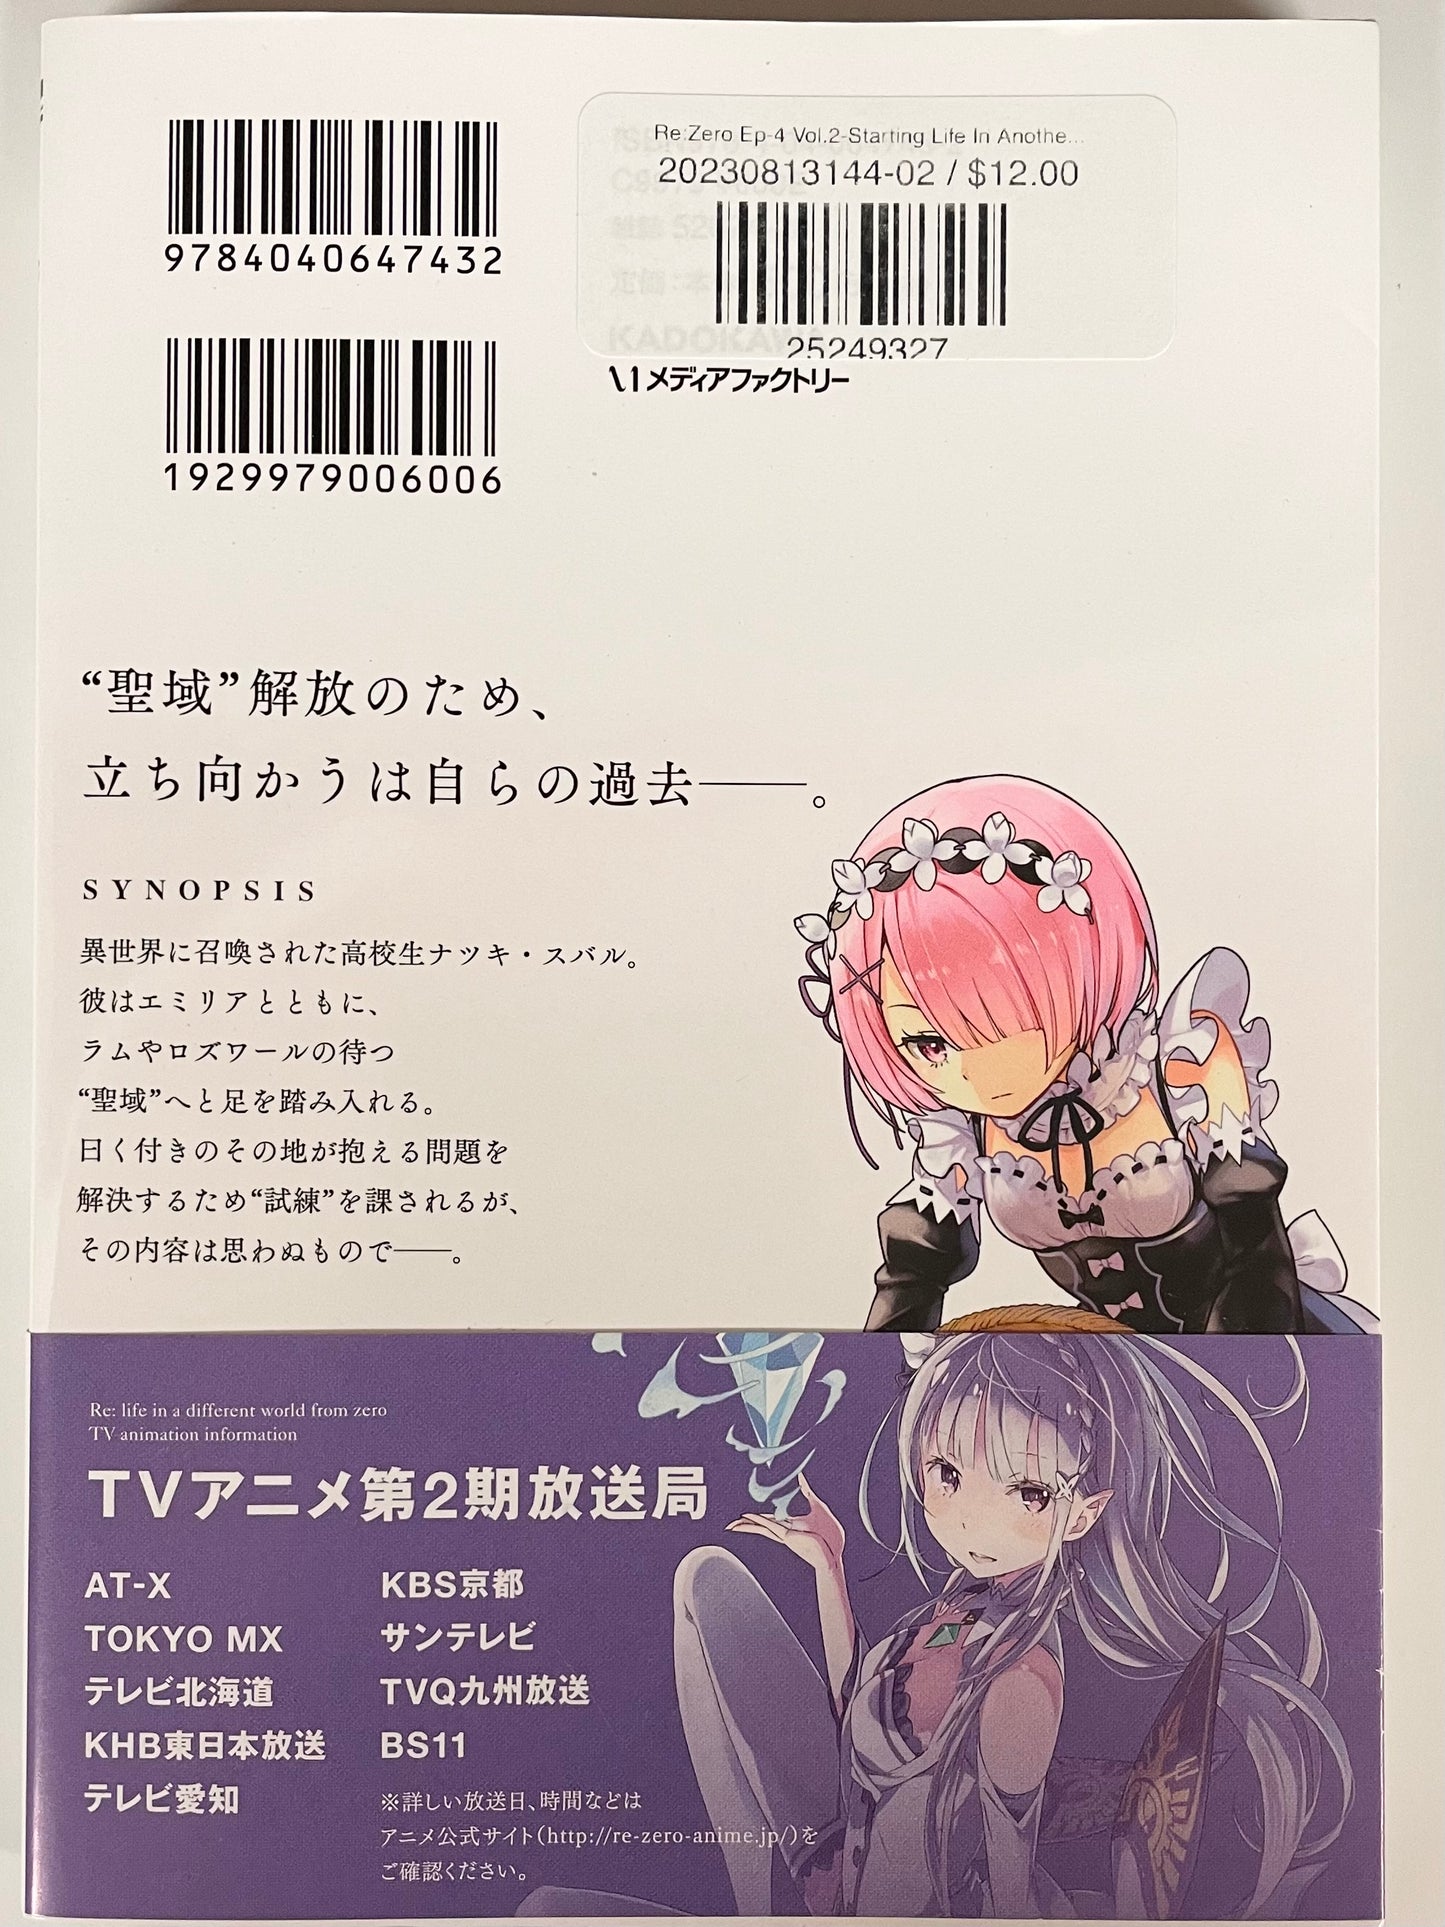 Re:Zero Ep-4 Vol.2-Starting Life In Another World-Official Japanese Edition